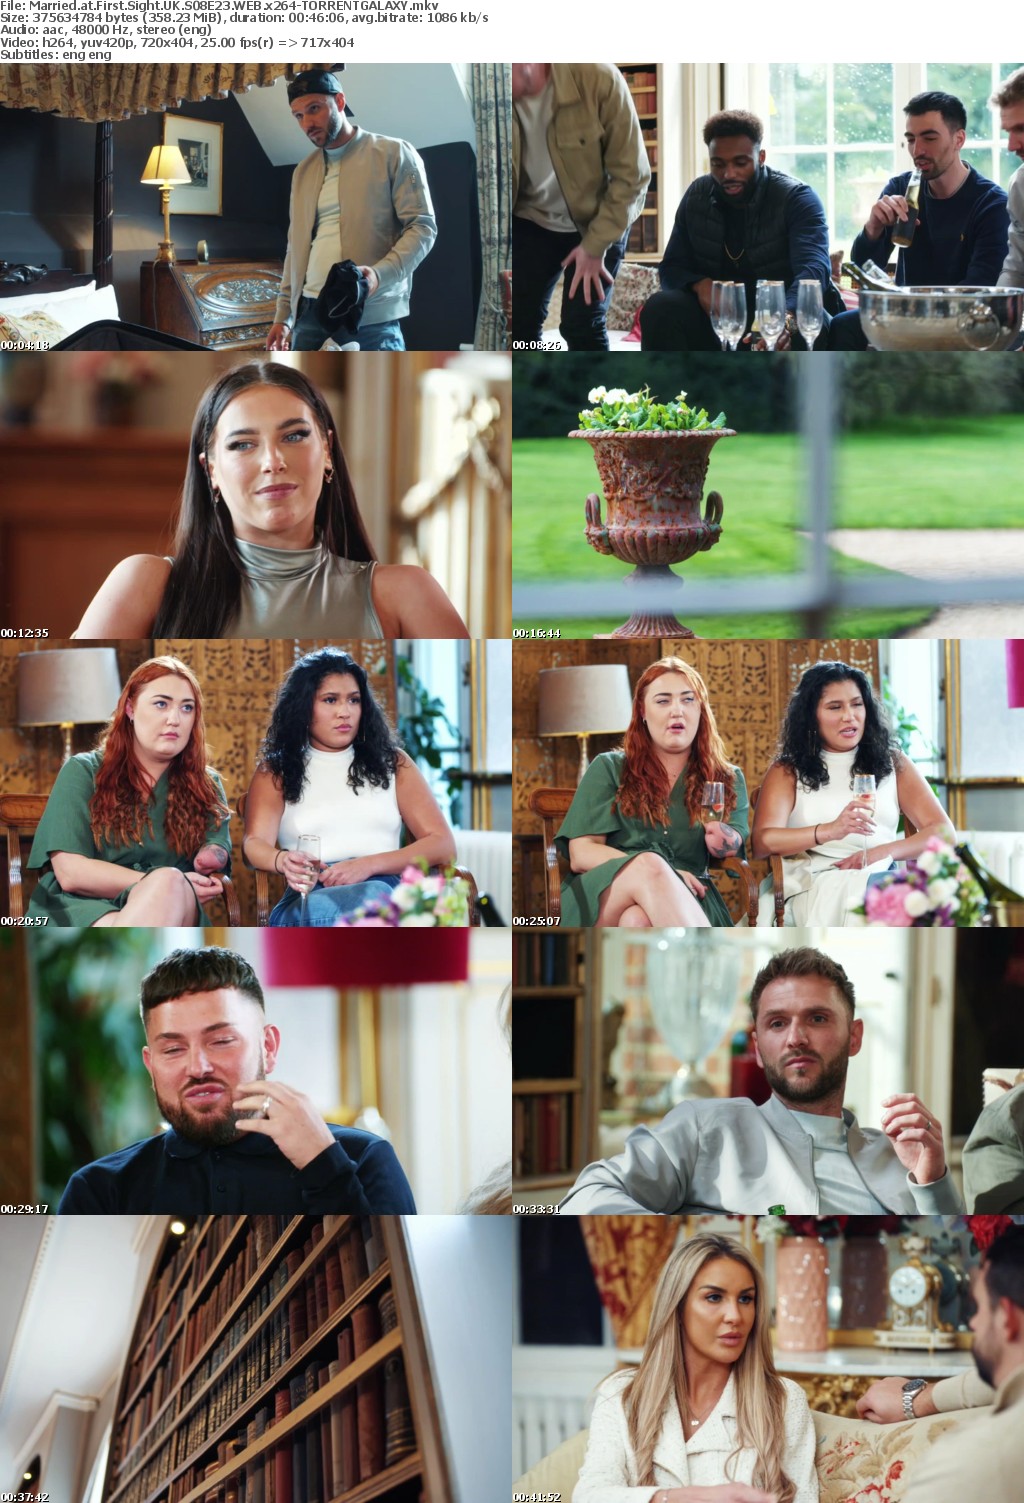 Married at First Sight UK S08E23 WEB x264-GALAXY